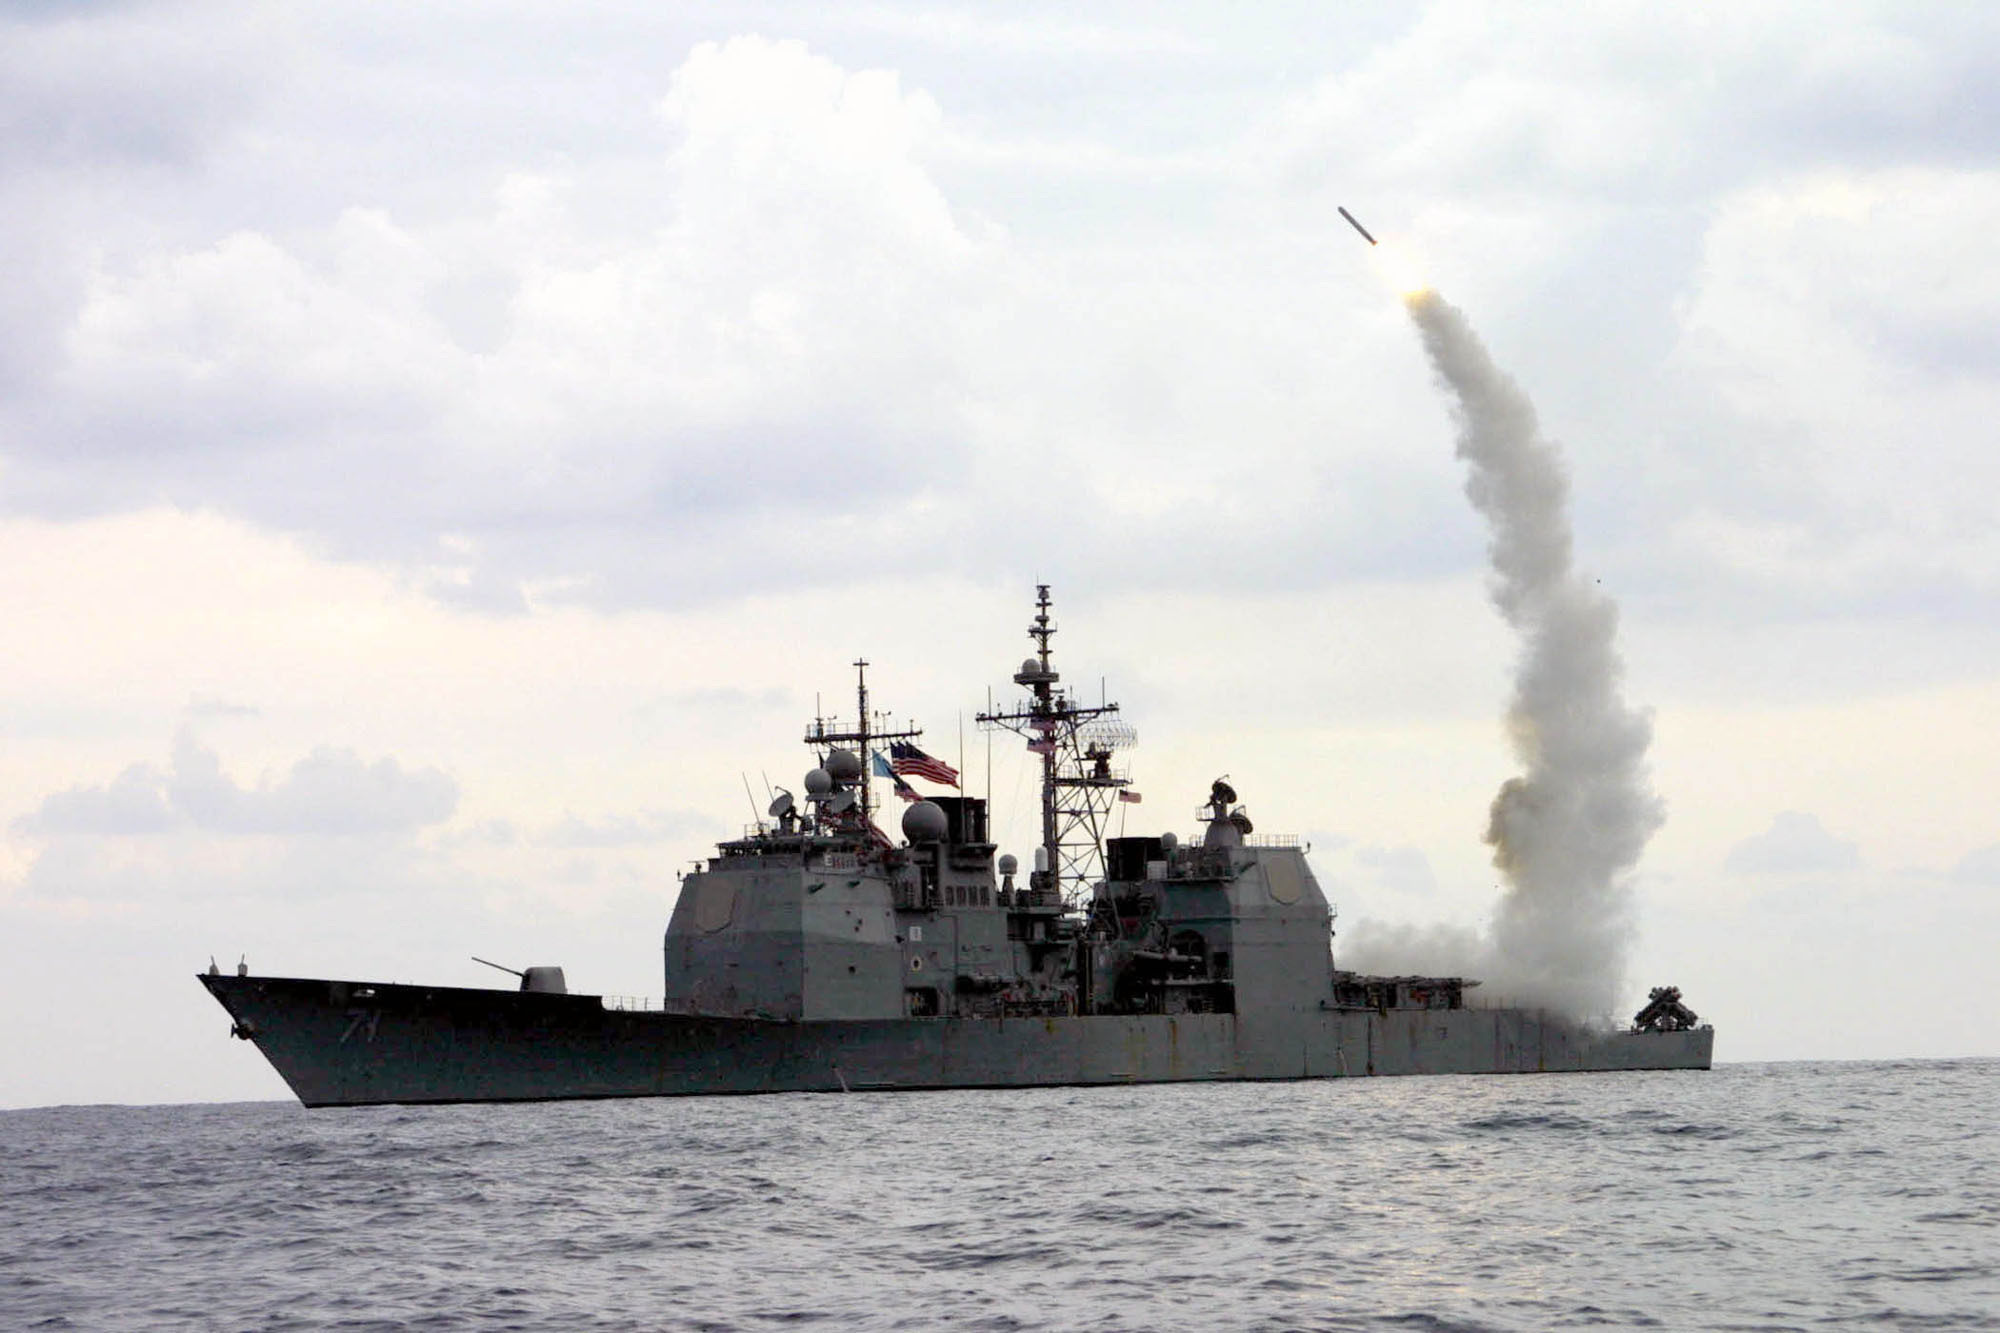 A Tomahawk Land Attack Missile launches from a guided missile cruiser in operation in the Mediterranean Sea. File photo: US Navy via AP